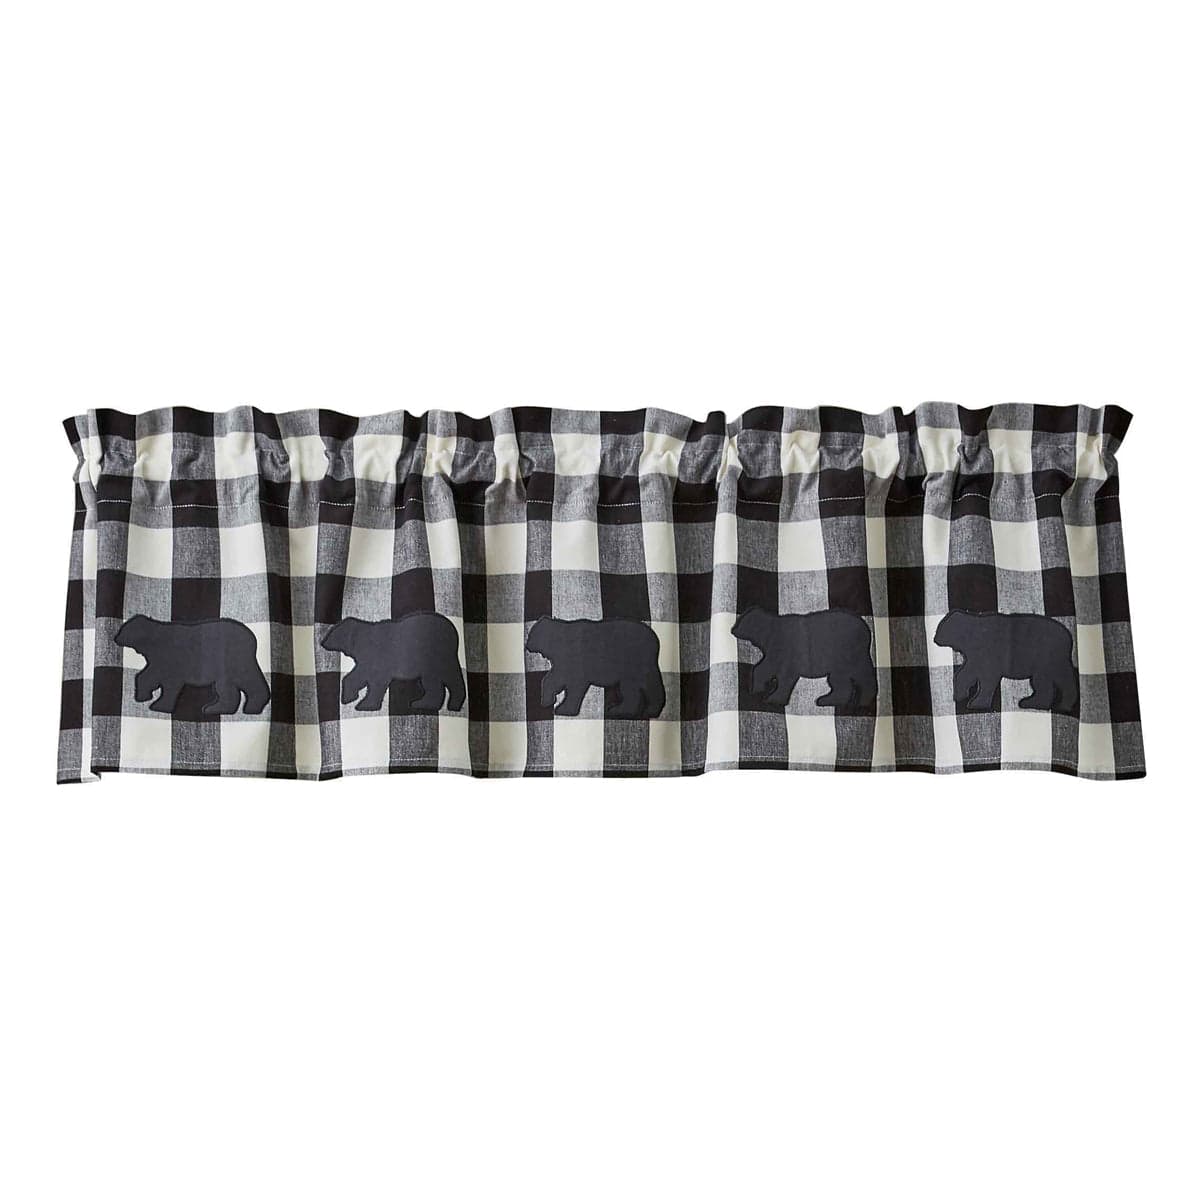 Wicklow Check in Black &amp; Cream Bear Valance Lined-Park Designs-The Village Merchant